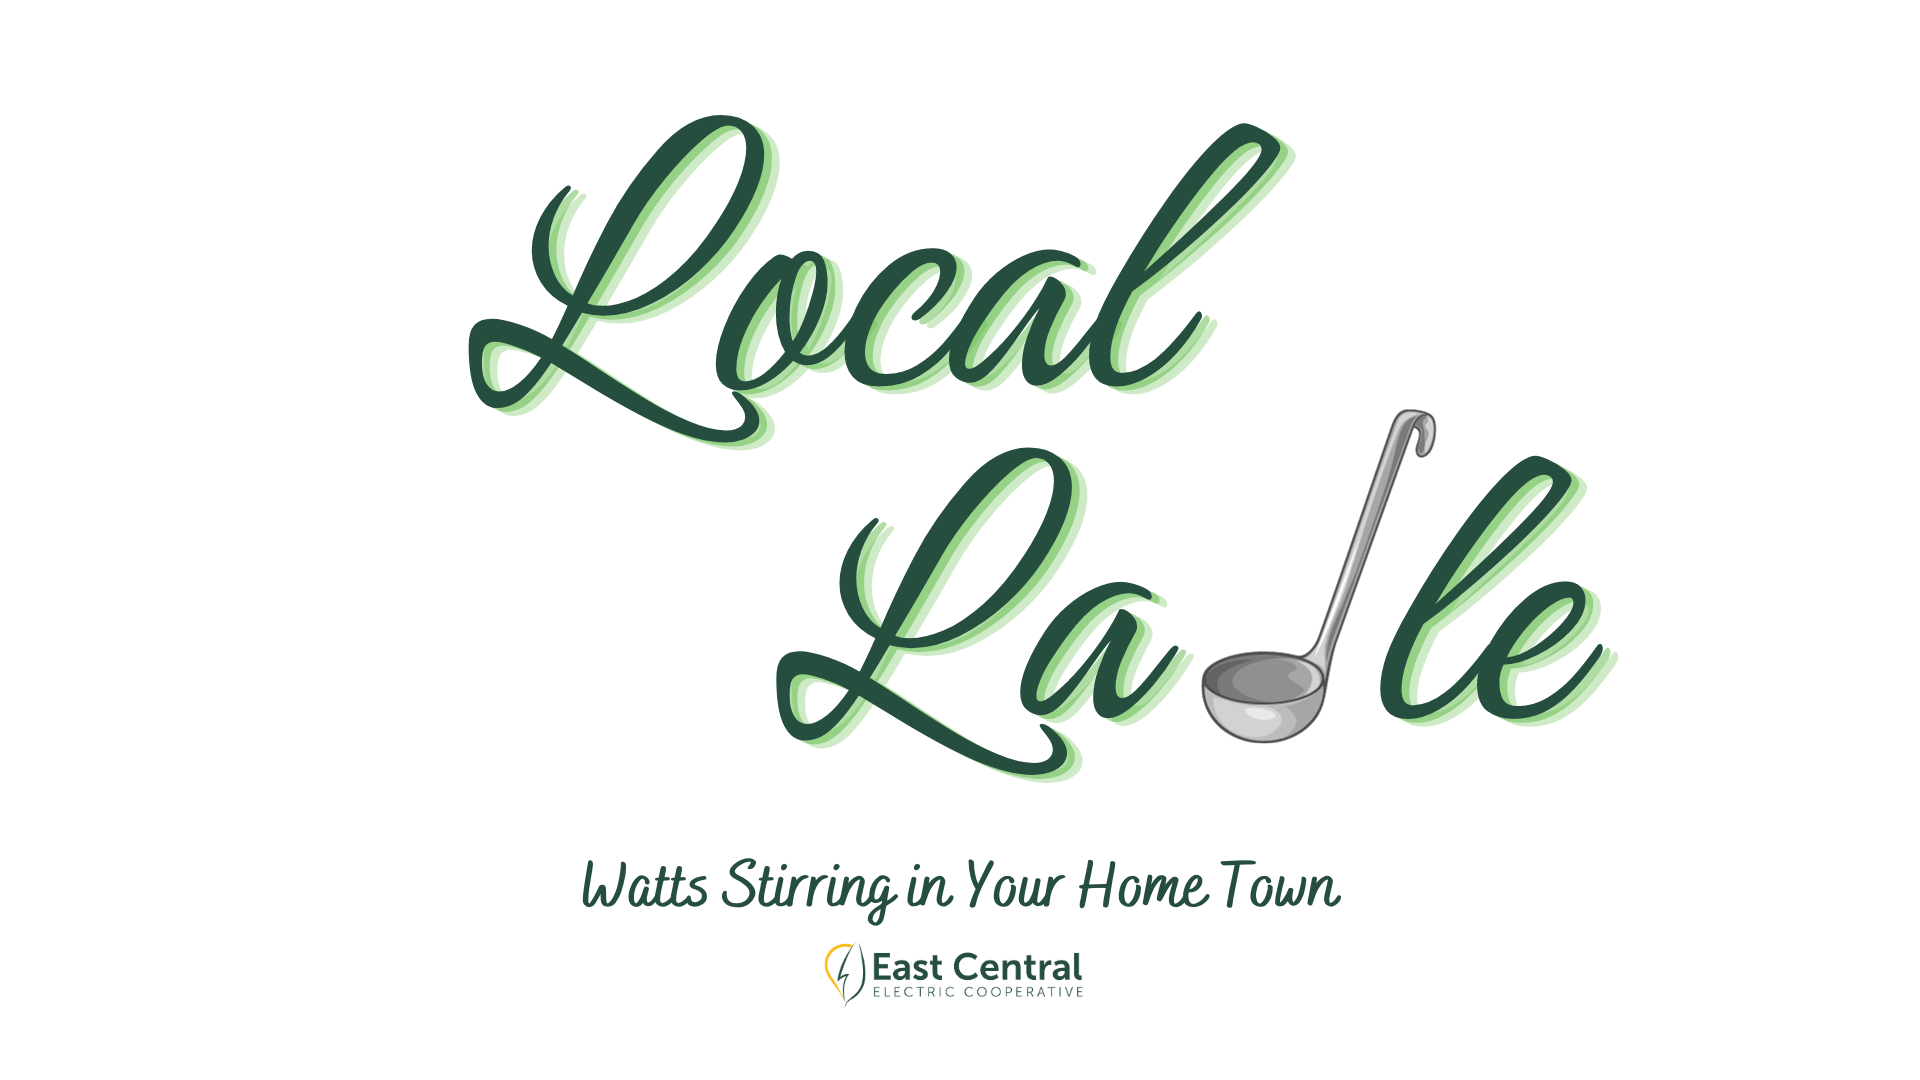 Logo for Local Ladle. Text Says "Local Ladle: Watts Stirring in Your Home Town." 